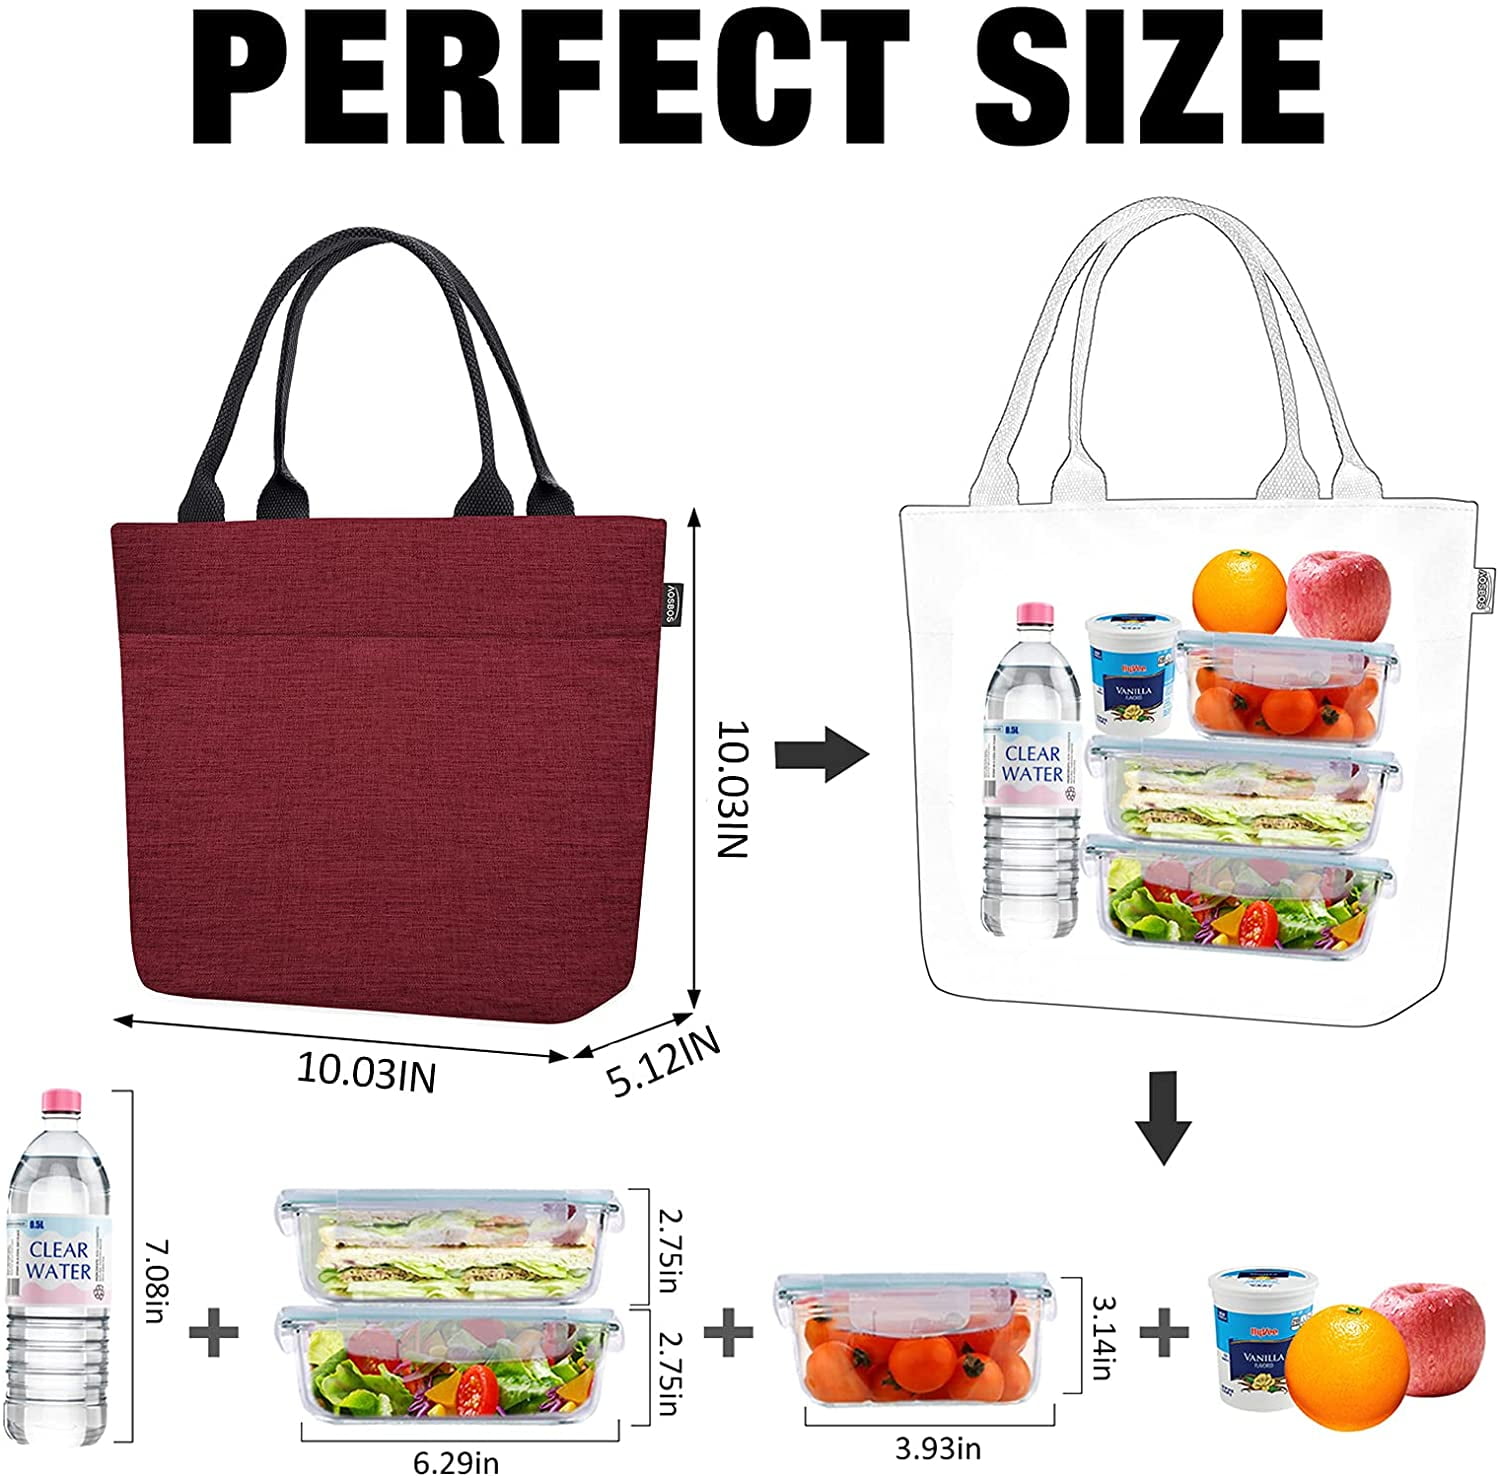 Aosbos Leakproof Lunch Bags for Women Insulated Lunch Bag Lunch Box Tote Bag Cooler Bag Loncheras Para Mujer Lunch Tote Lunchboxes Women for Work Outdoor Travel Picnic Gym-Claret